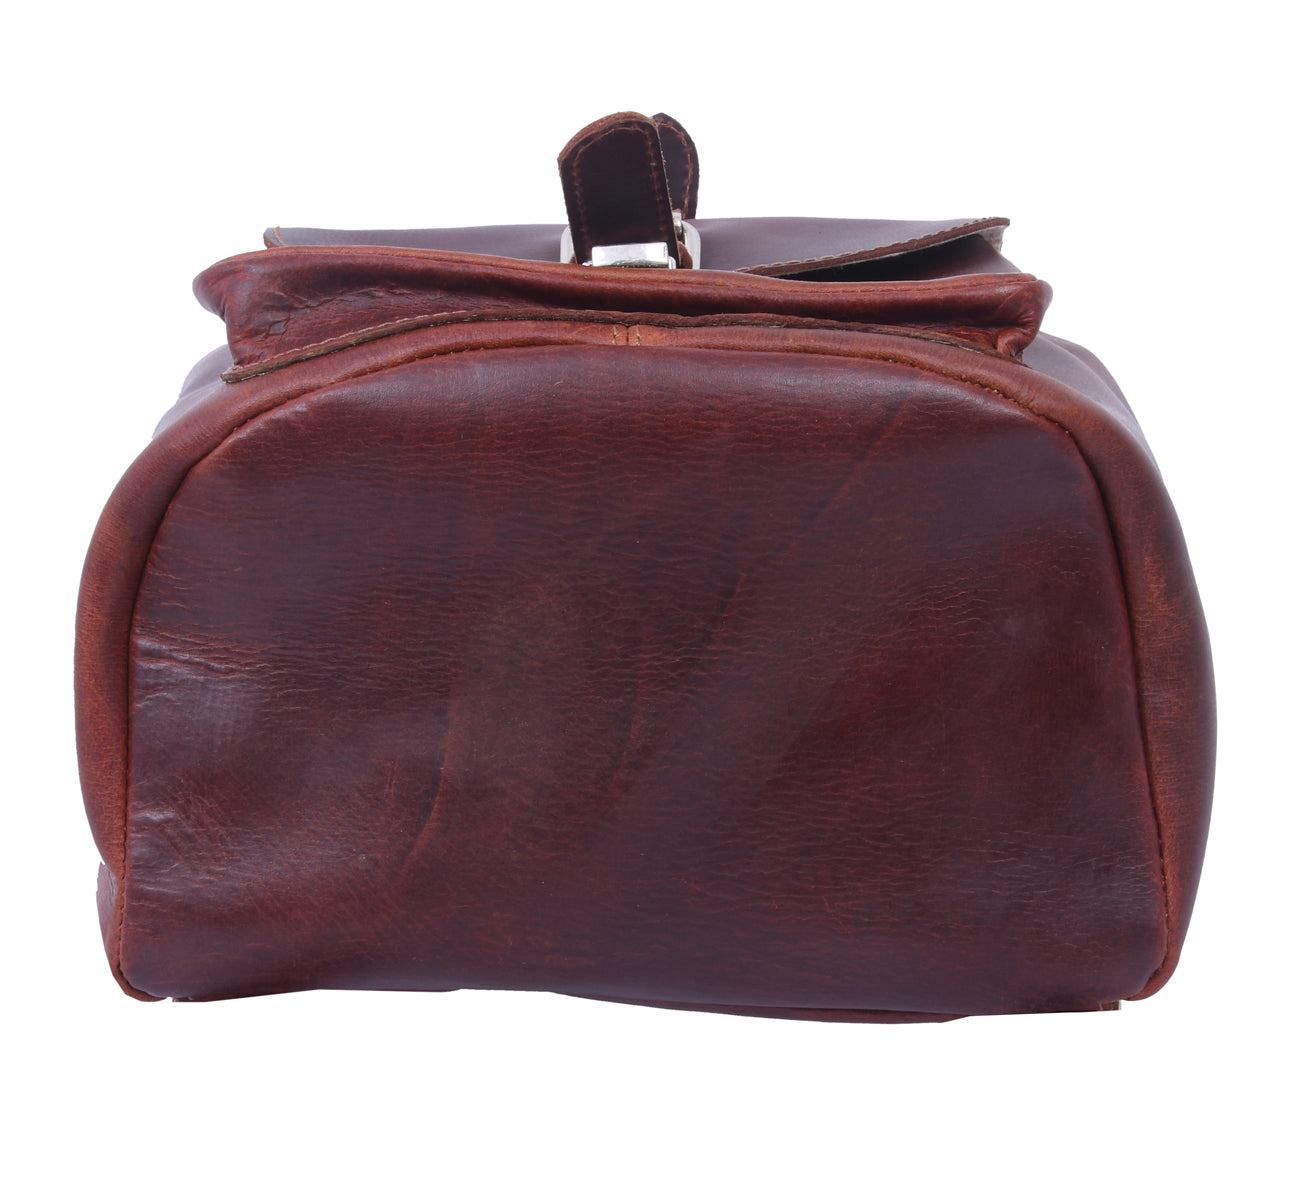 Elegant Brown Leather Backpack: A Timeless Fashion Statement. - CELTICINDIA